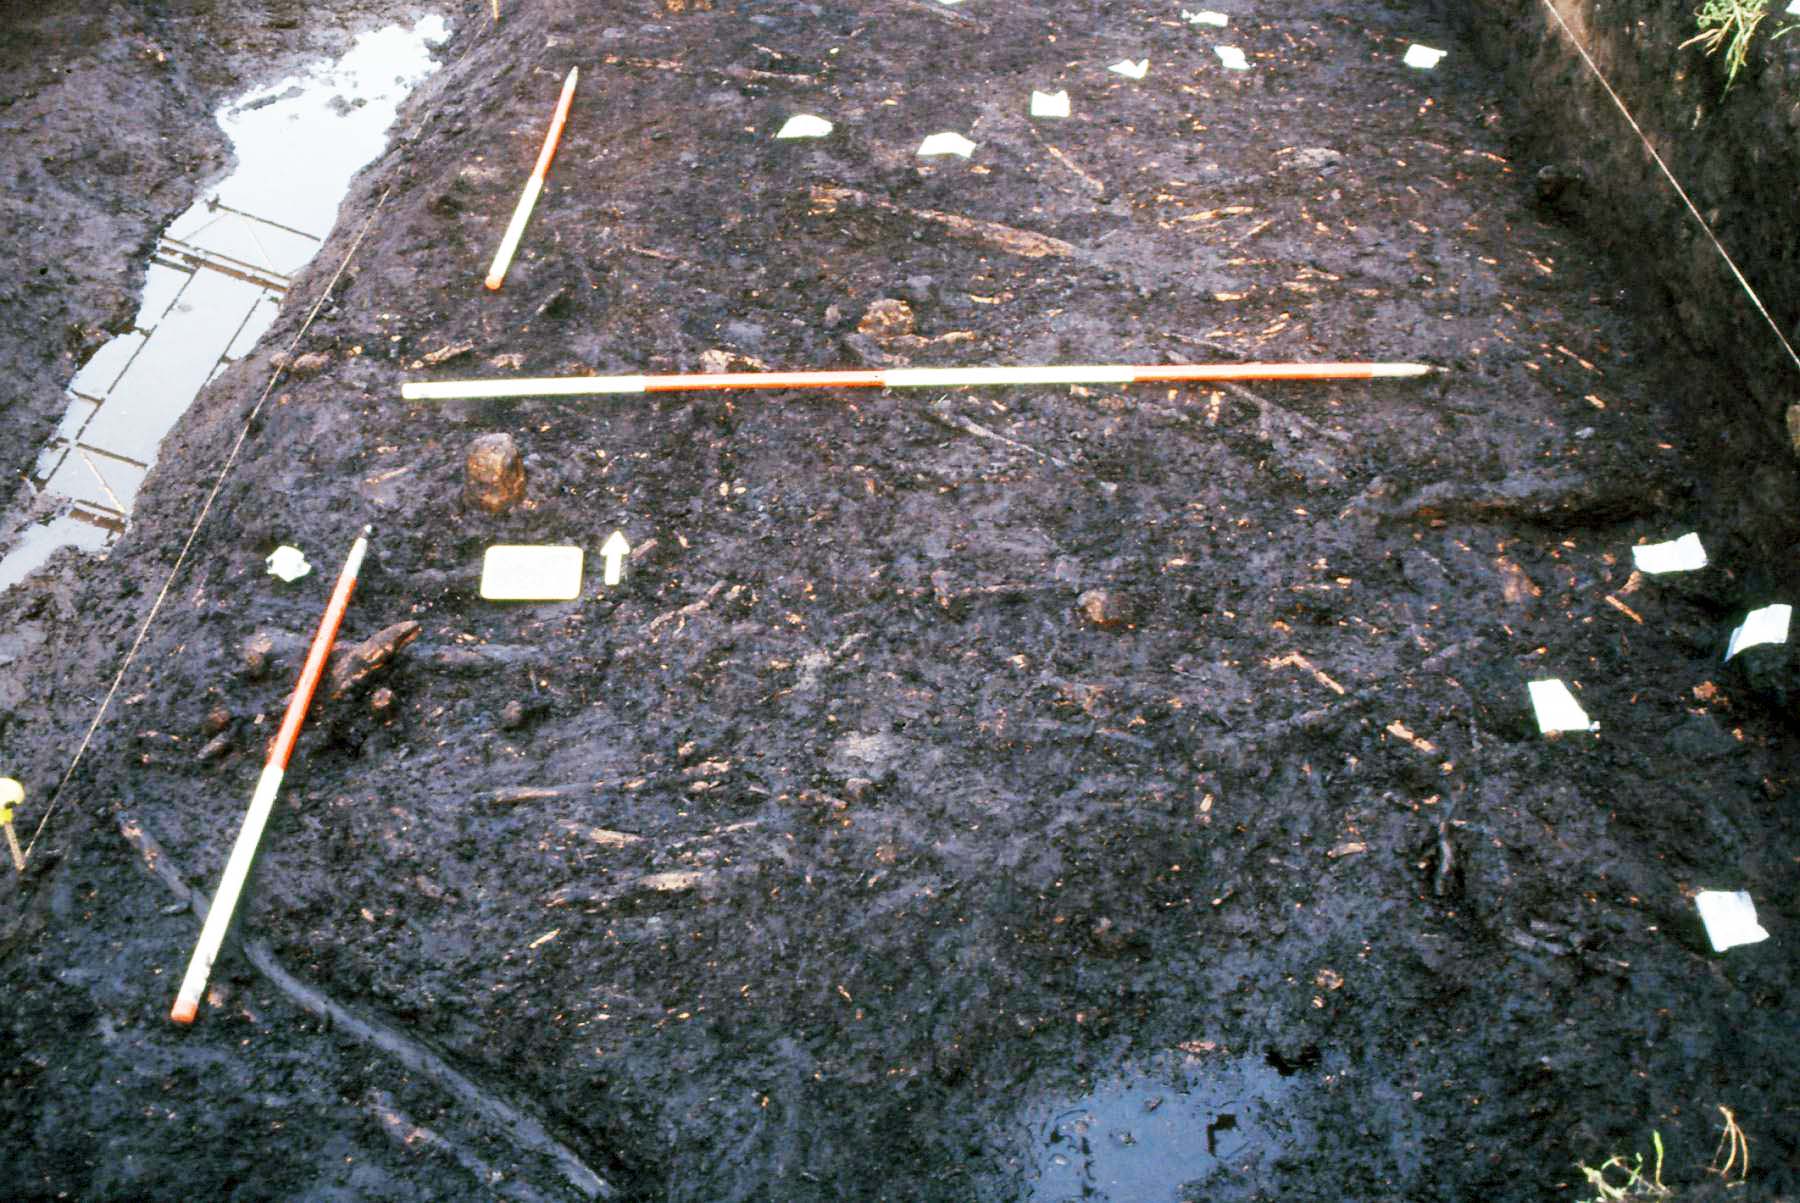 A photo of a very muddy archaeological trench, showing plant debris.